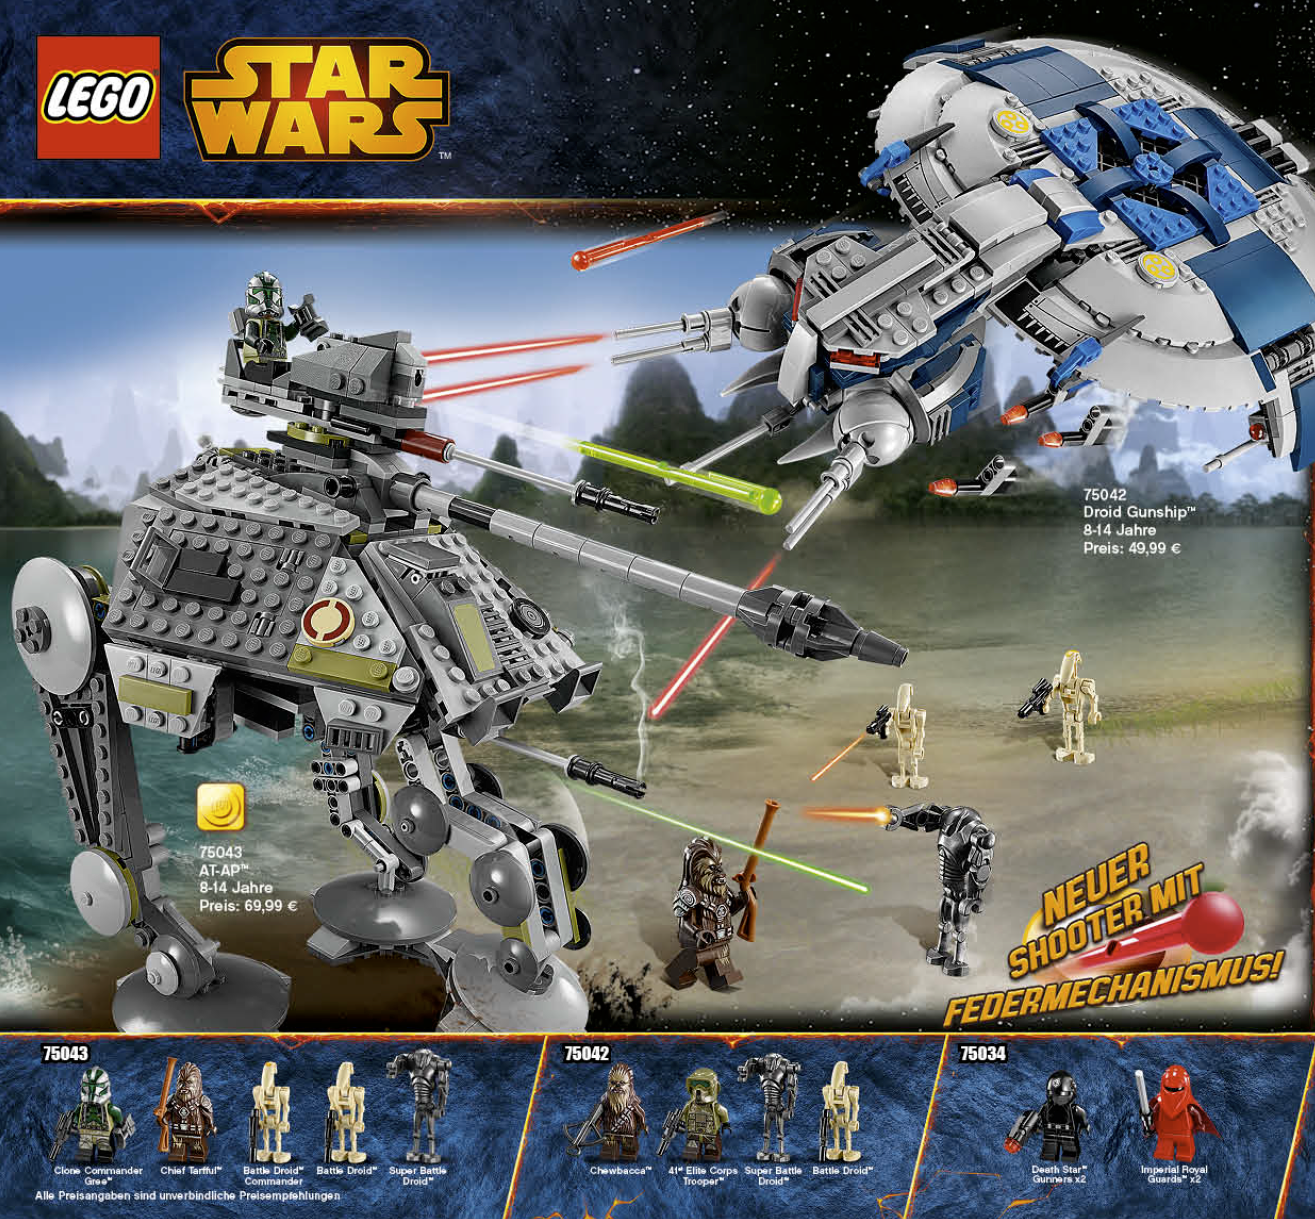 A page from the 2014 LEGO catalog